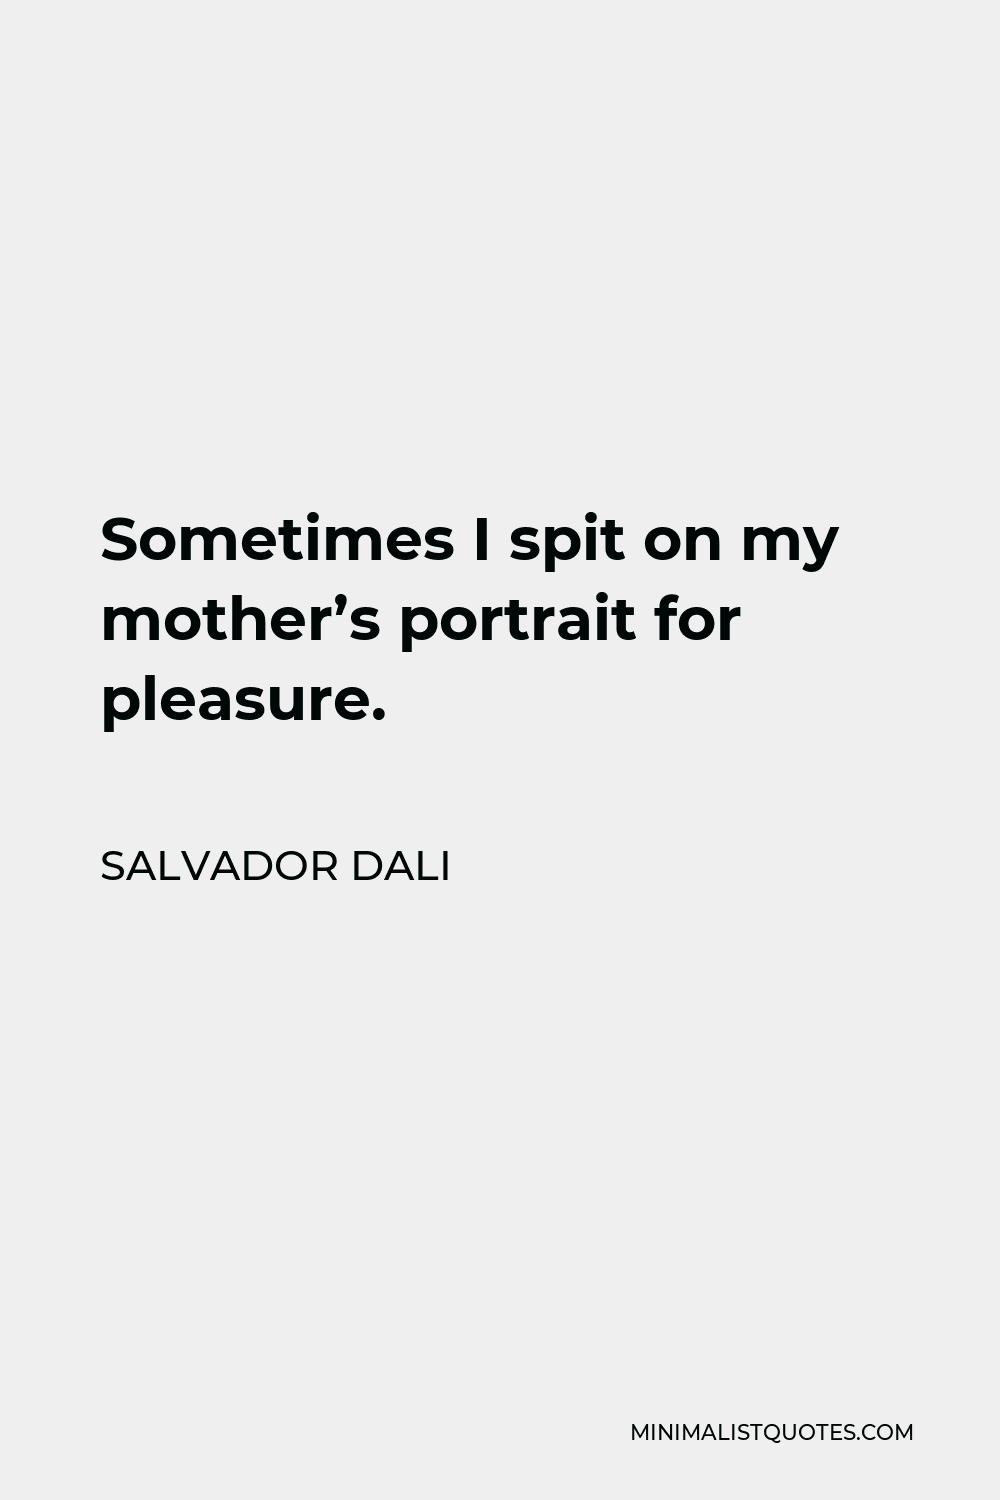 Salvador Dali Quote - Sometimes I spit on my mother’s portrait for pleasure.